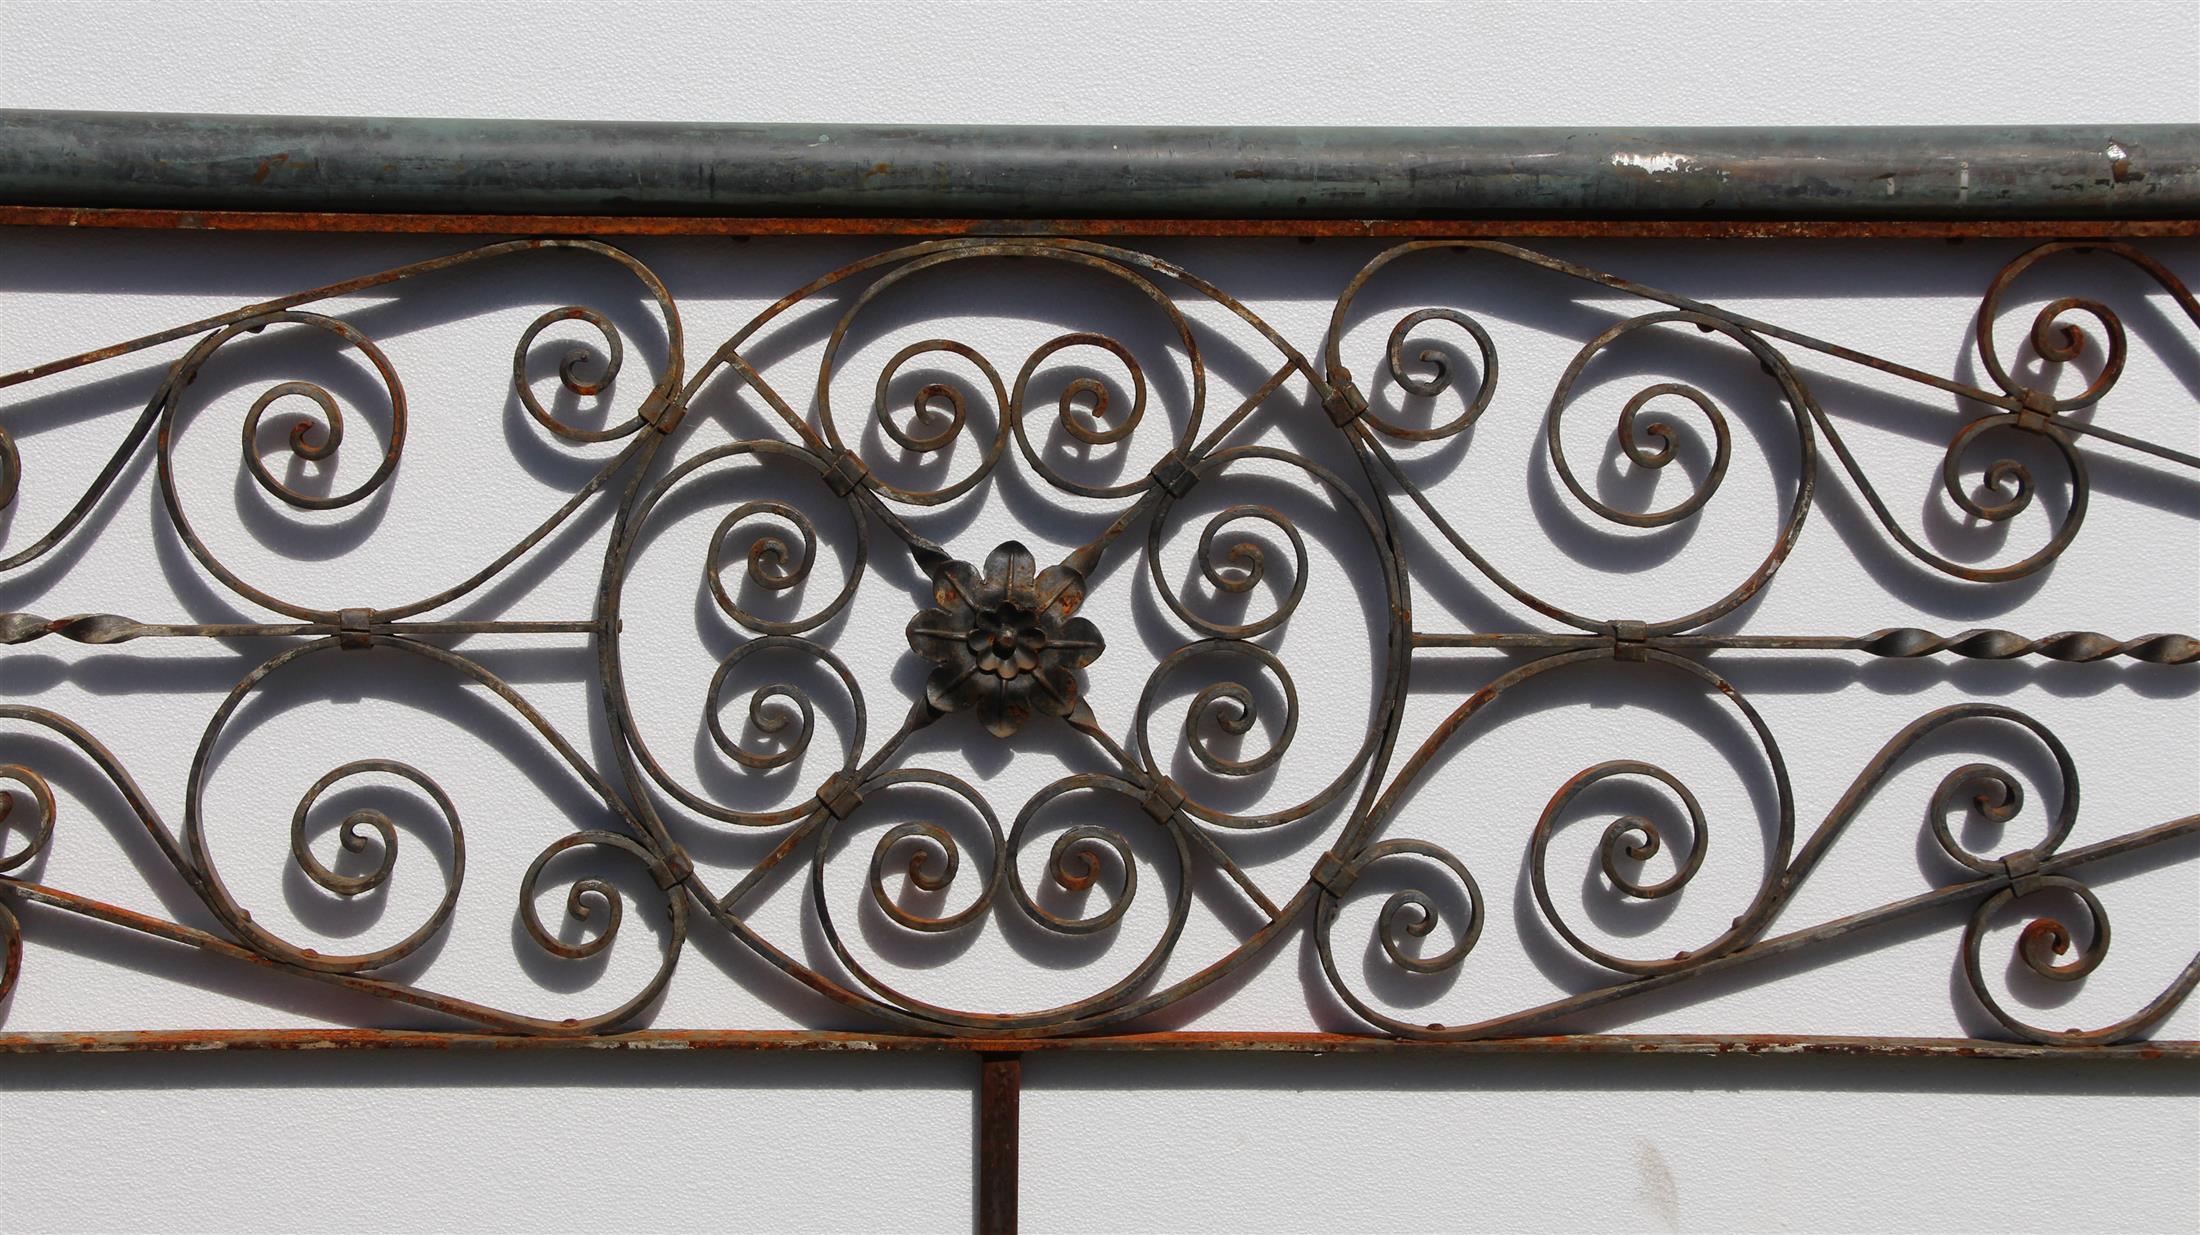 1920s original ornate balcony railing with amazing hand-wrought iron detail and a hollow metal top. Has rust. Please note, this item is located in our Scranton, PA location.